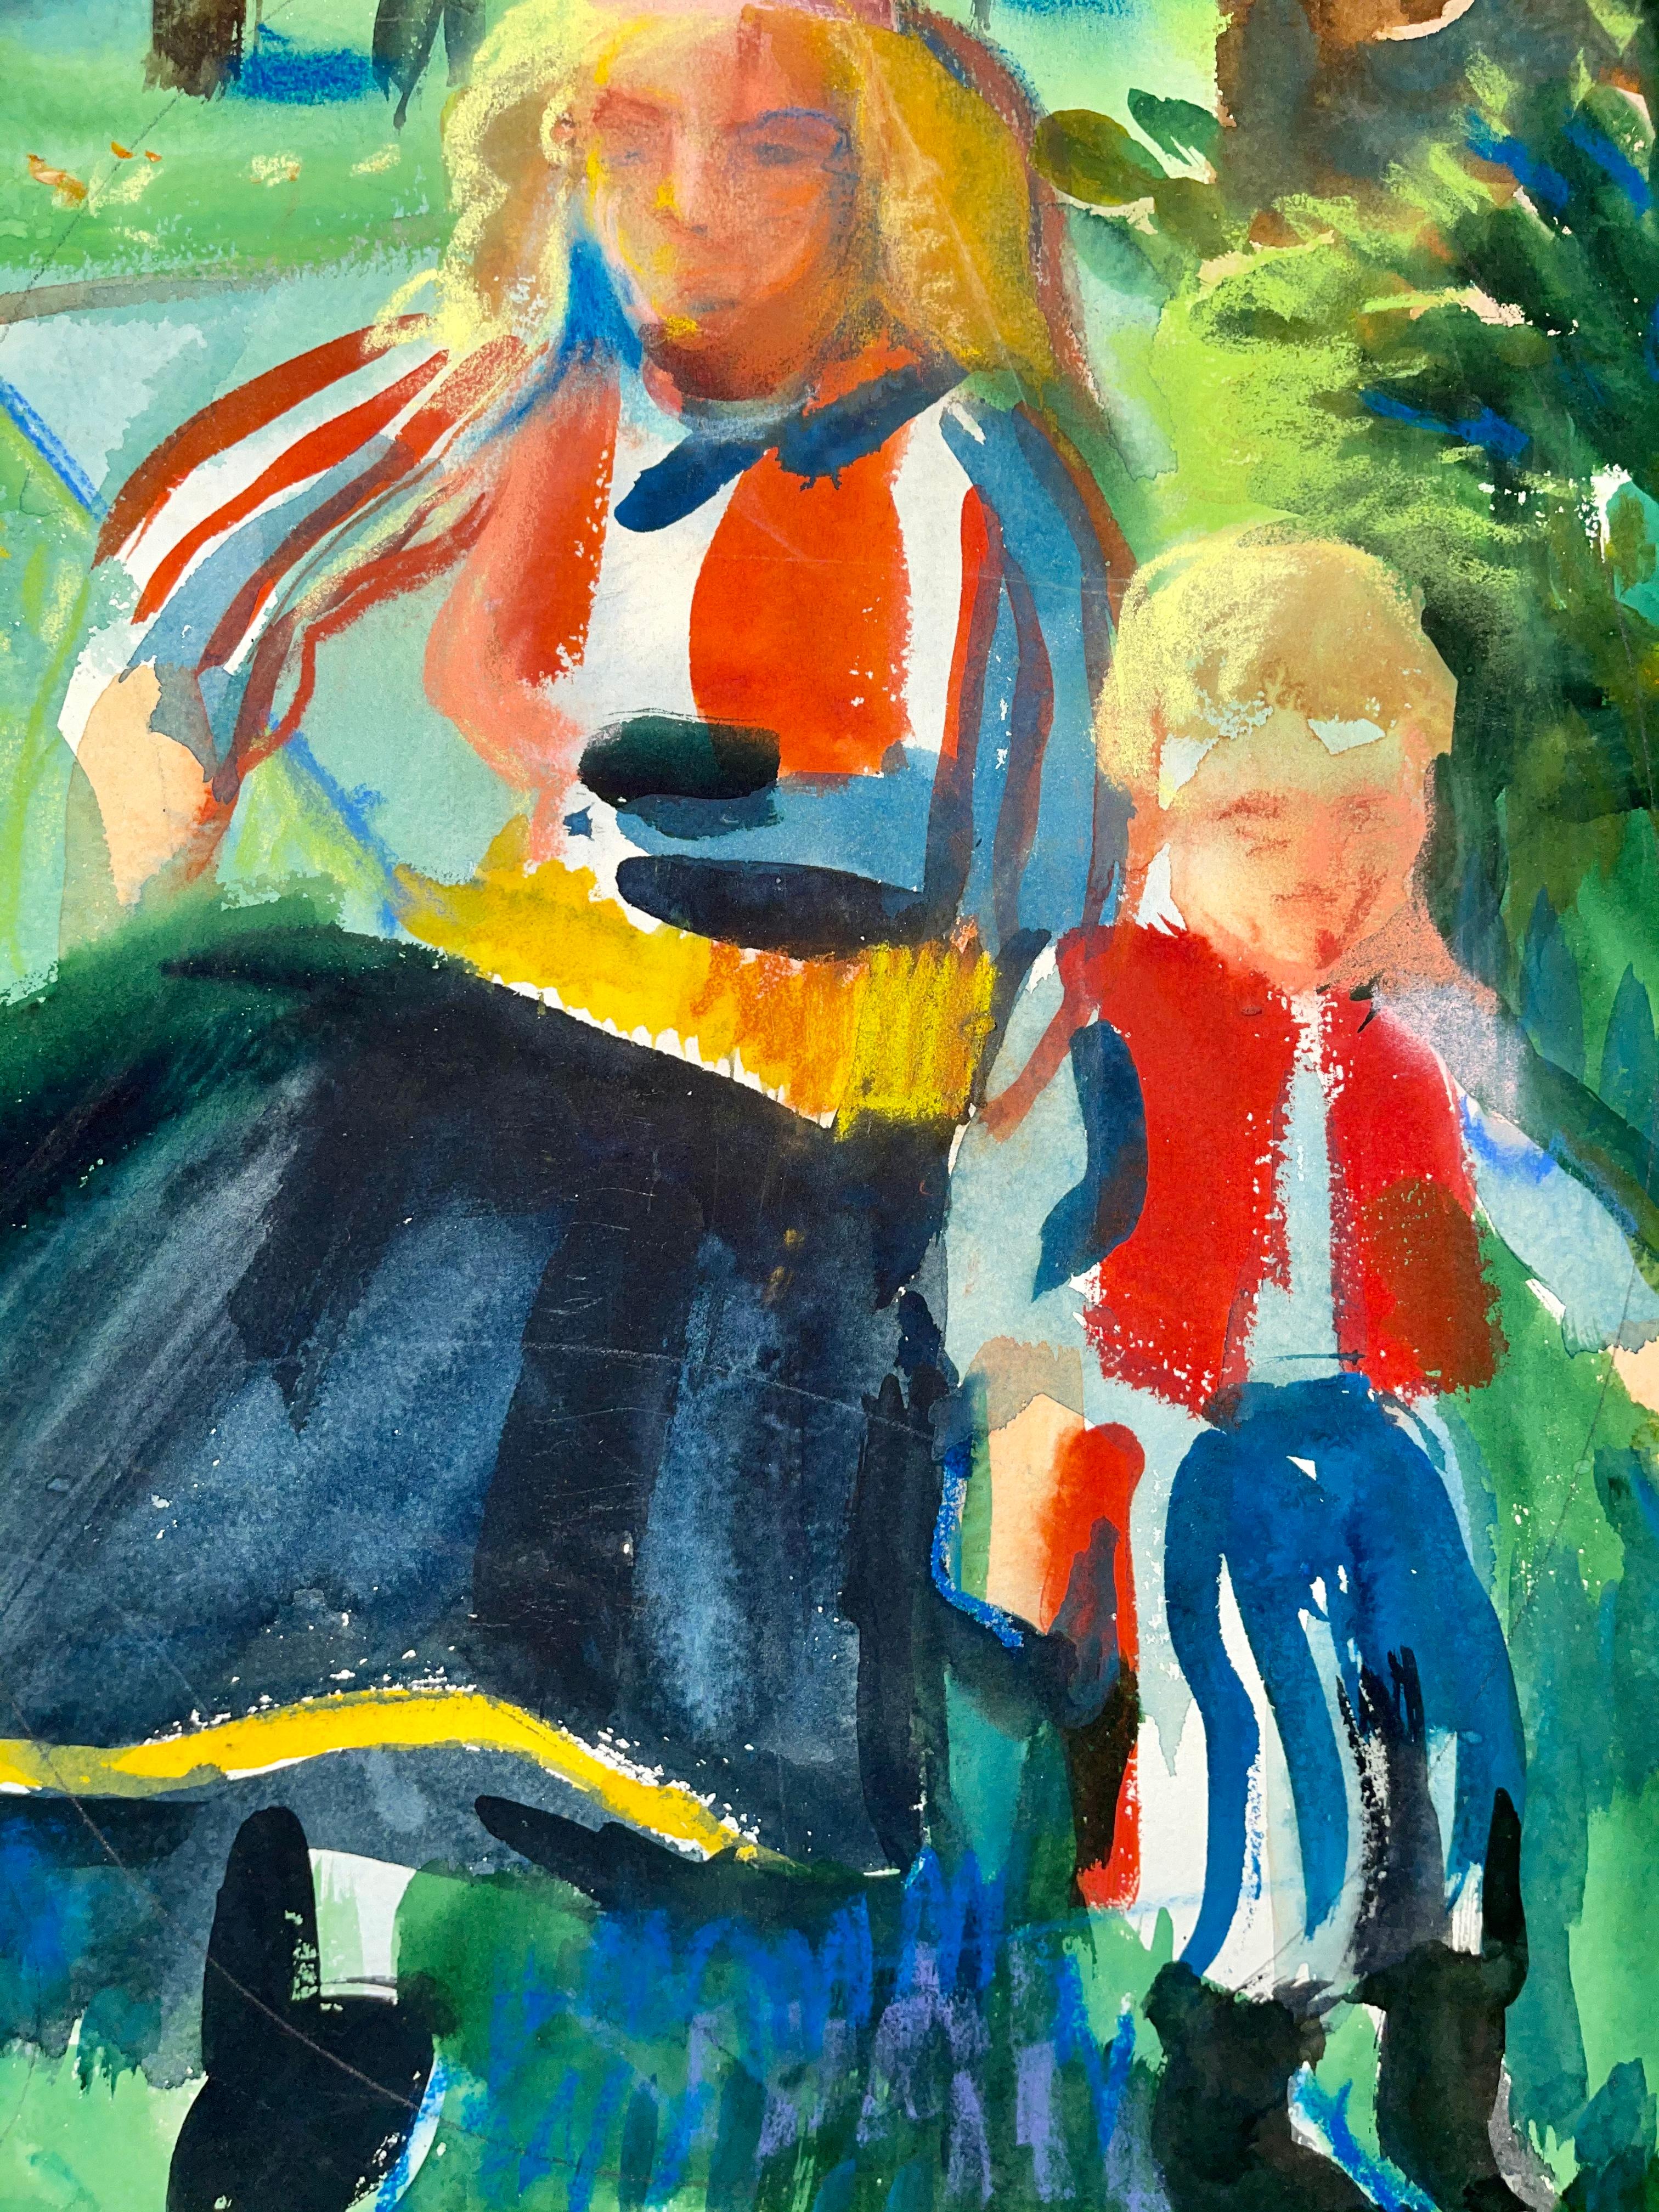 Artist: Ian Hornak (1944-2002)
Title: Untitled (Neo-Impressionist Figures in Landscape)
Year: 1963
Medium: Watercolor on heavy archival paper
Size: 29.5 x 21 inches
Condition: Good
Provenance: Estate of Ian Hornak, East Hampton, NY
Notes: A rare